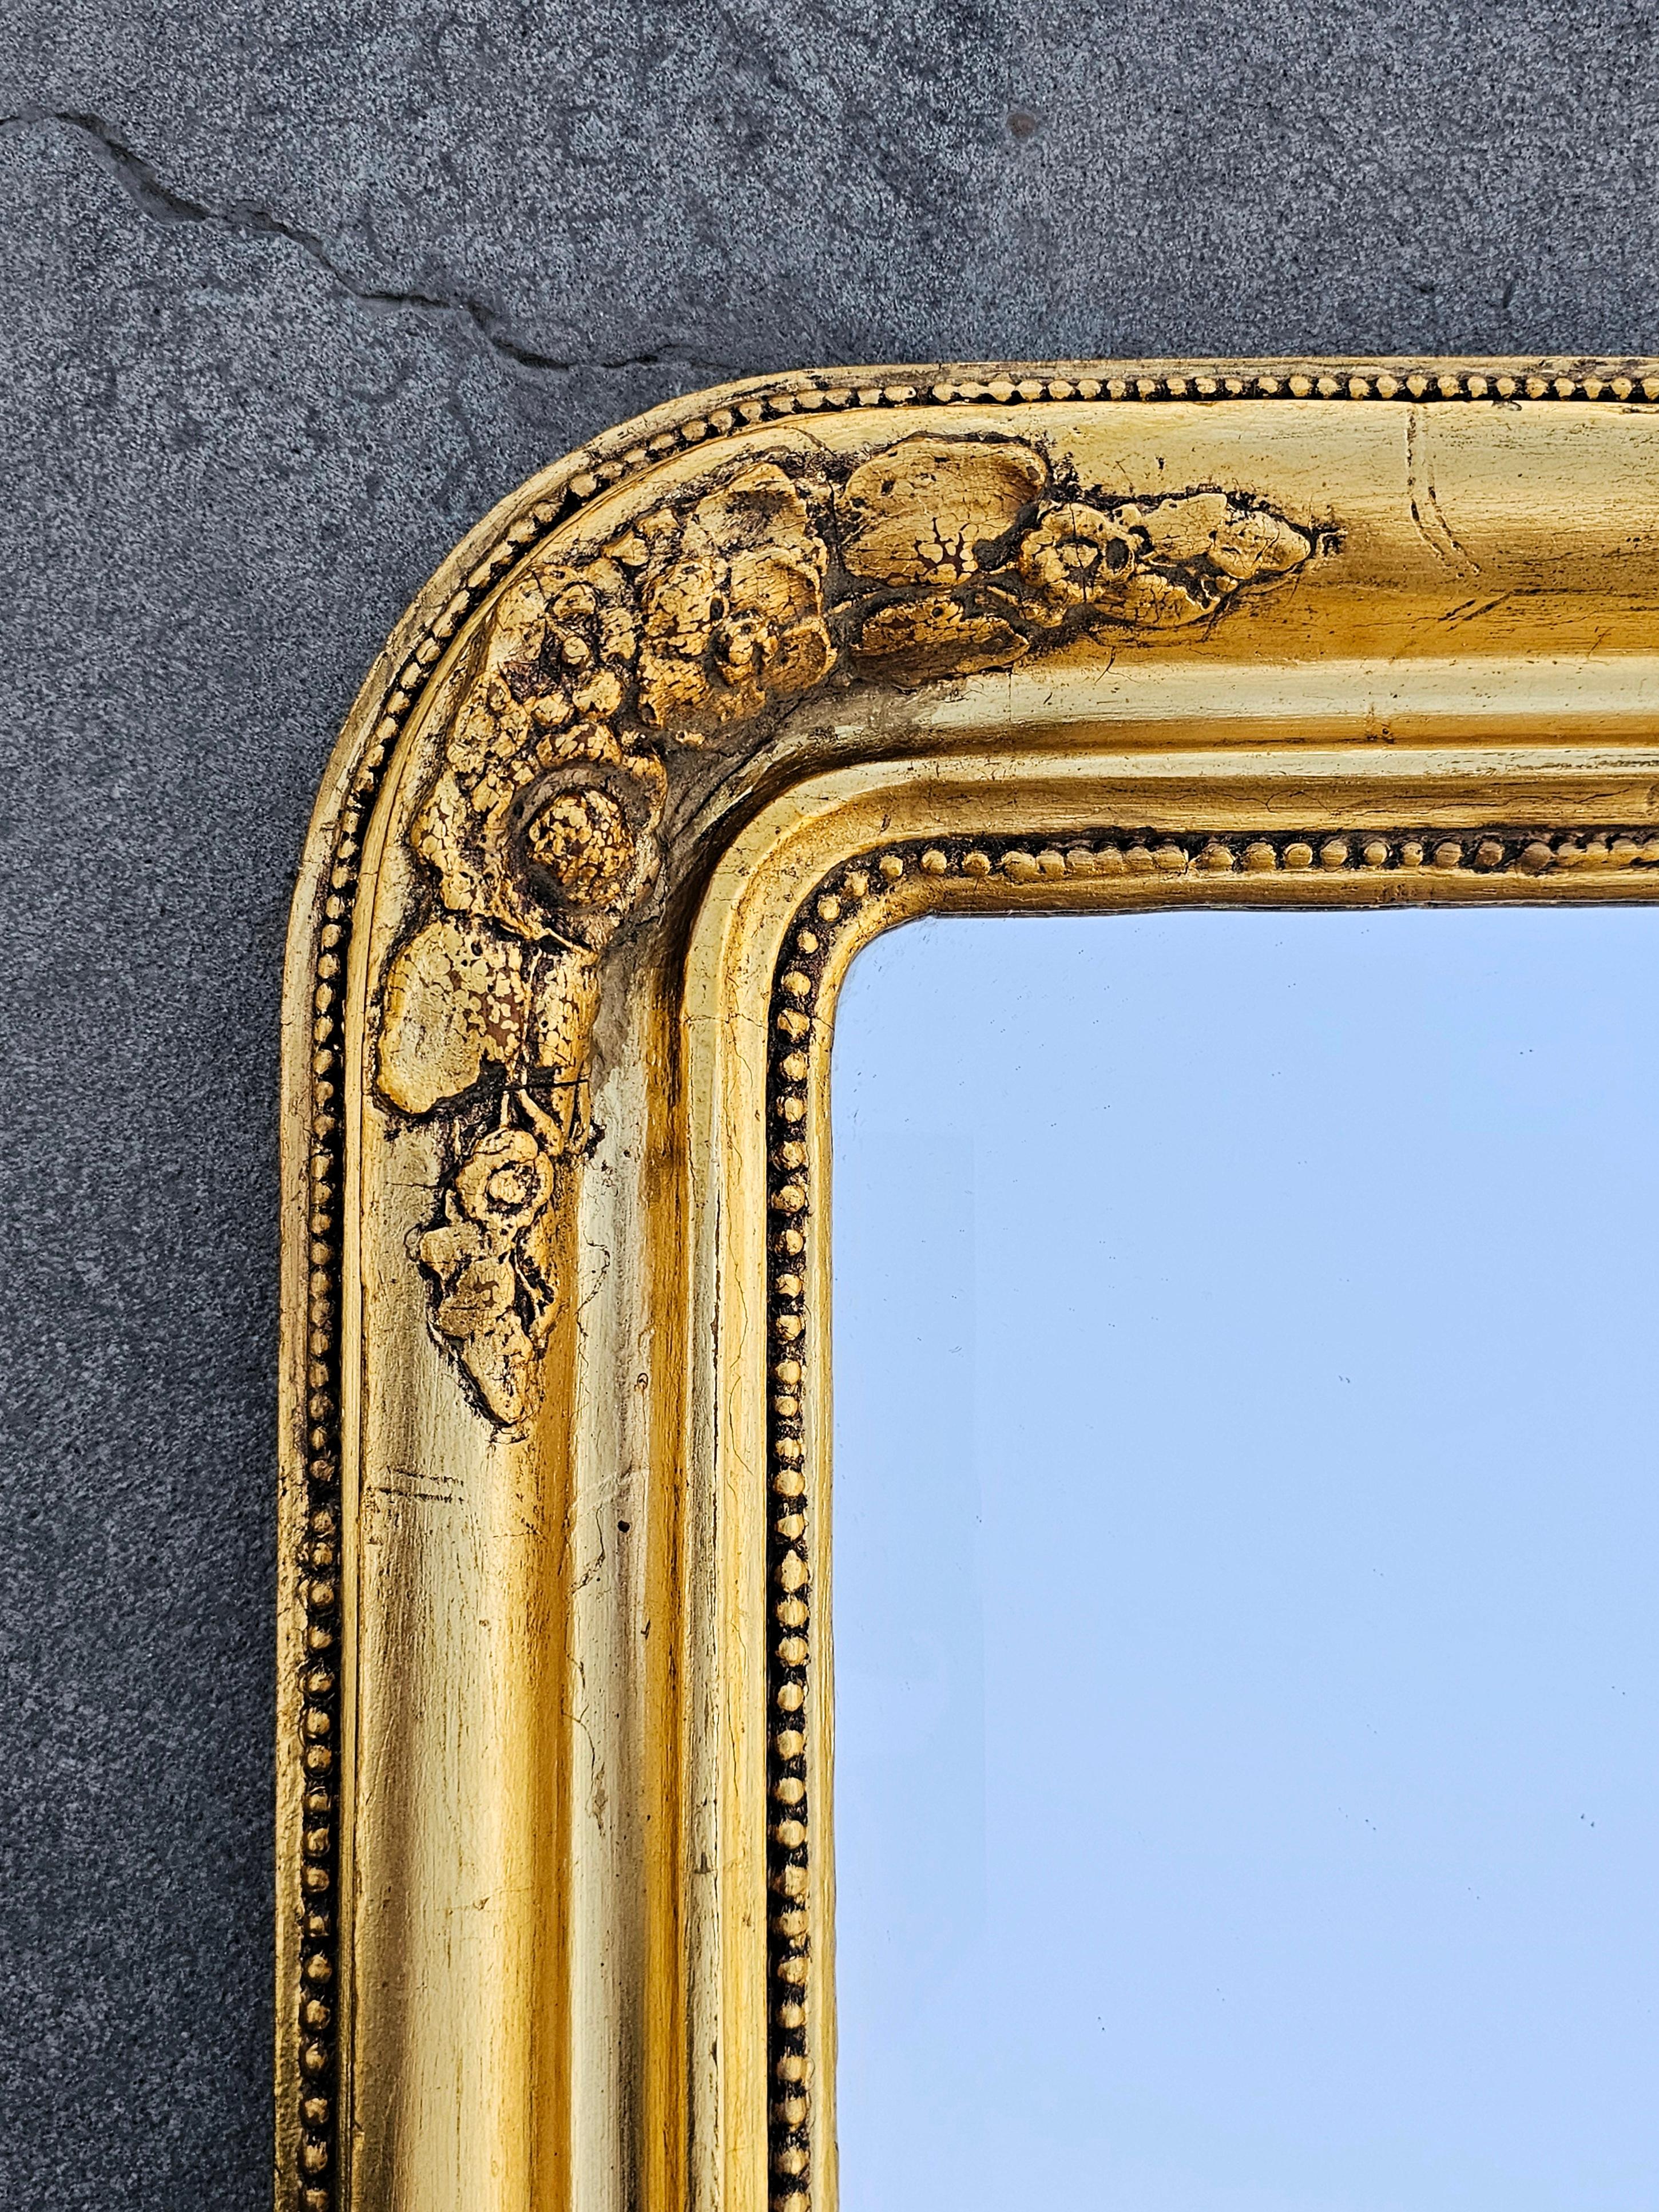 Mid-19th Century Large and rare Biedermeier Gilt Wood Faceted Mirror, Austria cca. 1840s For Sale